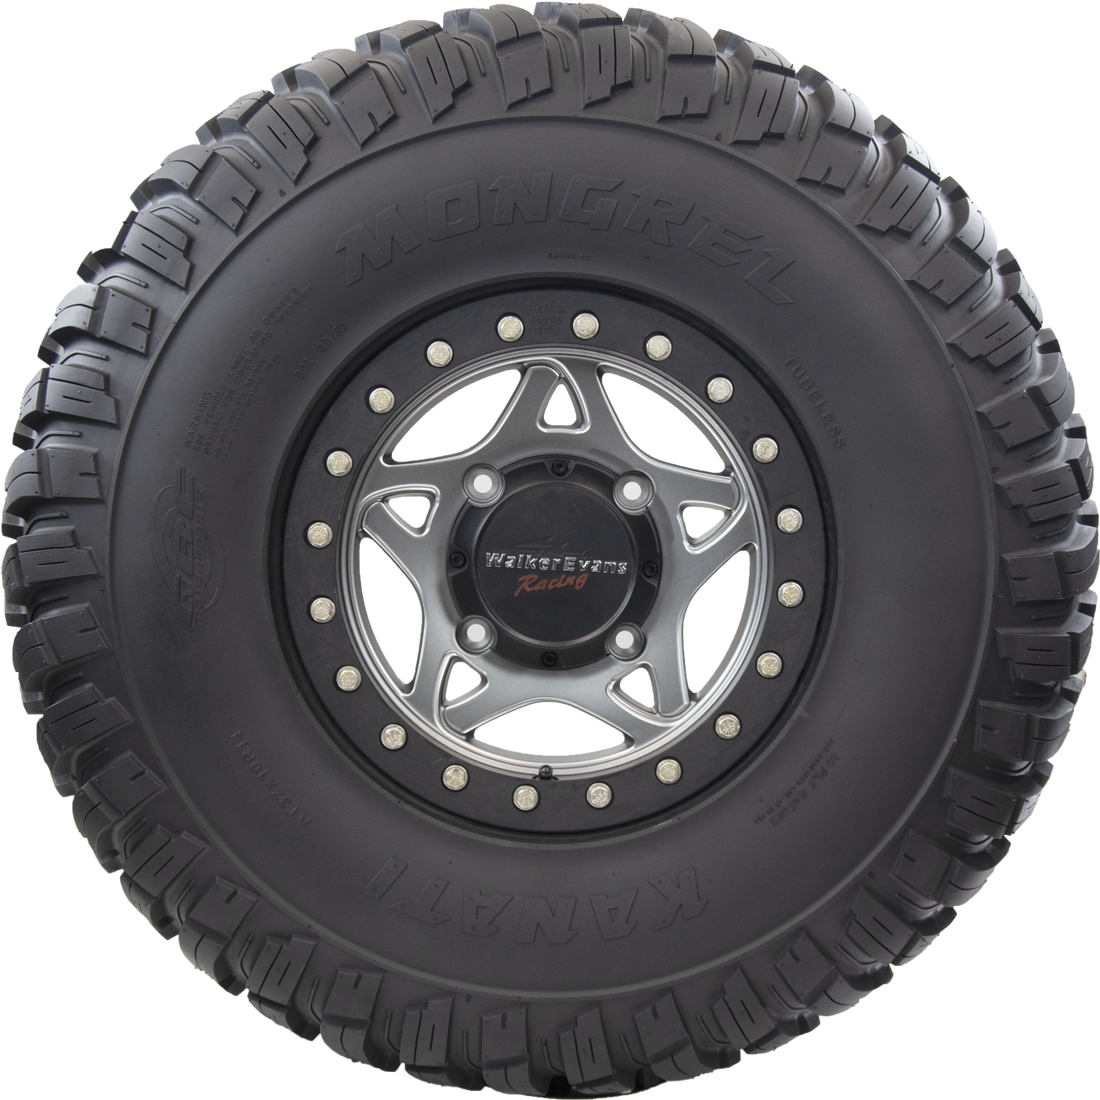 Sideview of Mongrel ATV/UTV tire, highlighting the reinforced sidewall designed for greater puncture resistance, ensuring a durable and safe ride in rugged terrains.